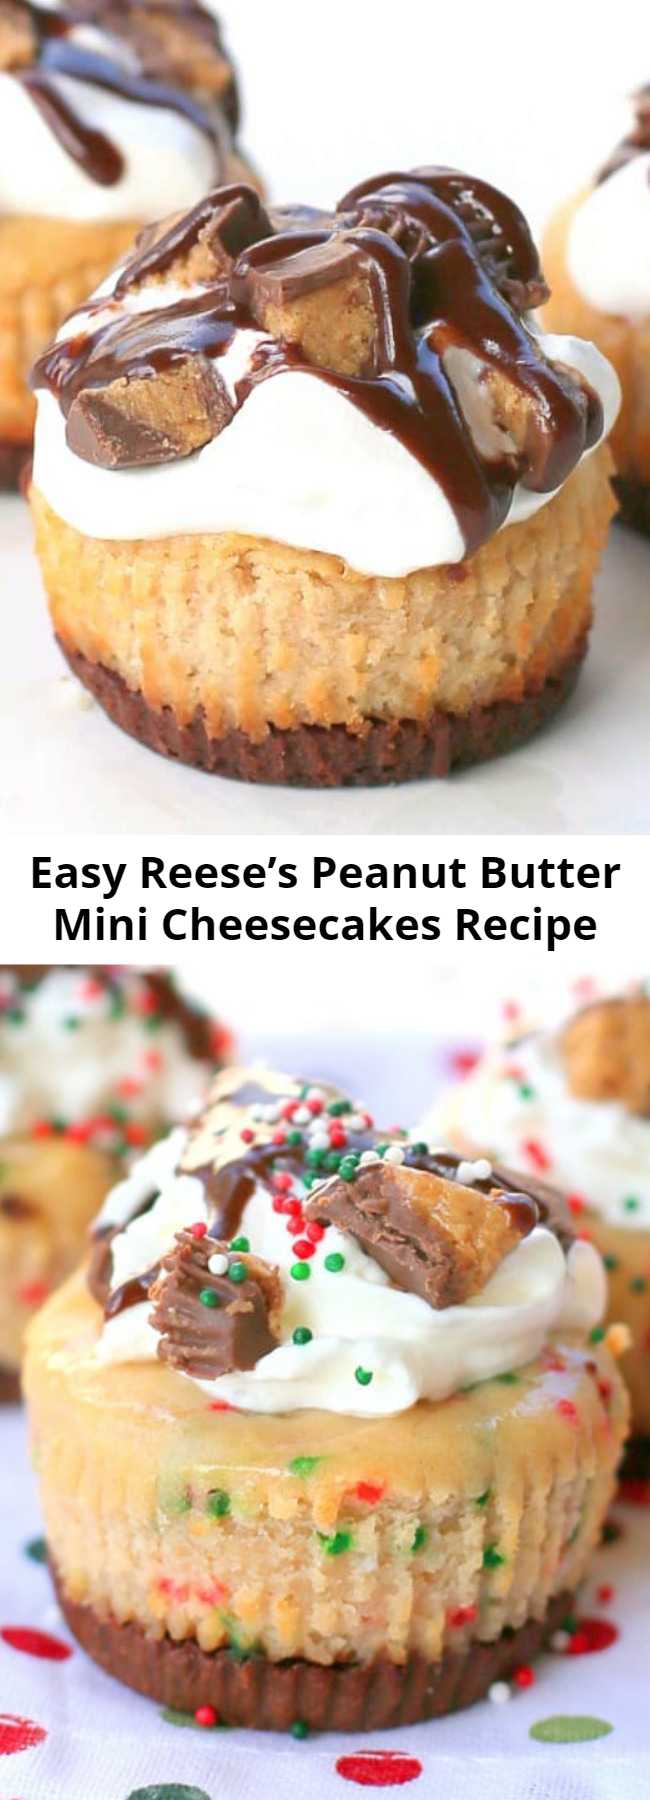 Easy Reese’s Peanut Butter Mini Cheesecakes Recipe - These Reese's Peanut Butter Mini Cheesecakes are so easy! The crust is made from a full size Reese's peanut butter cup.